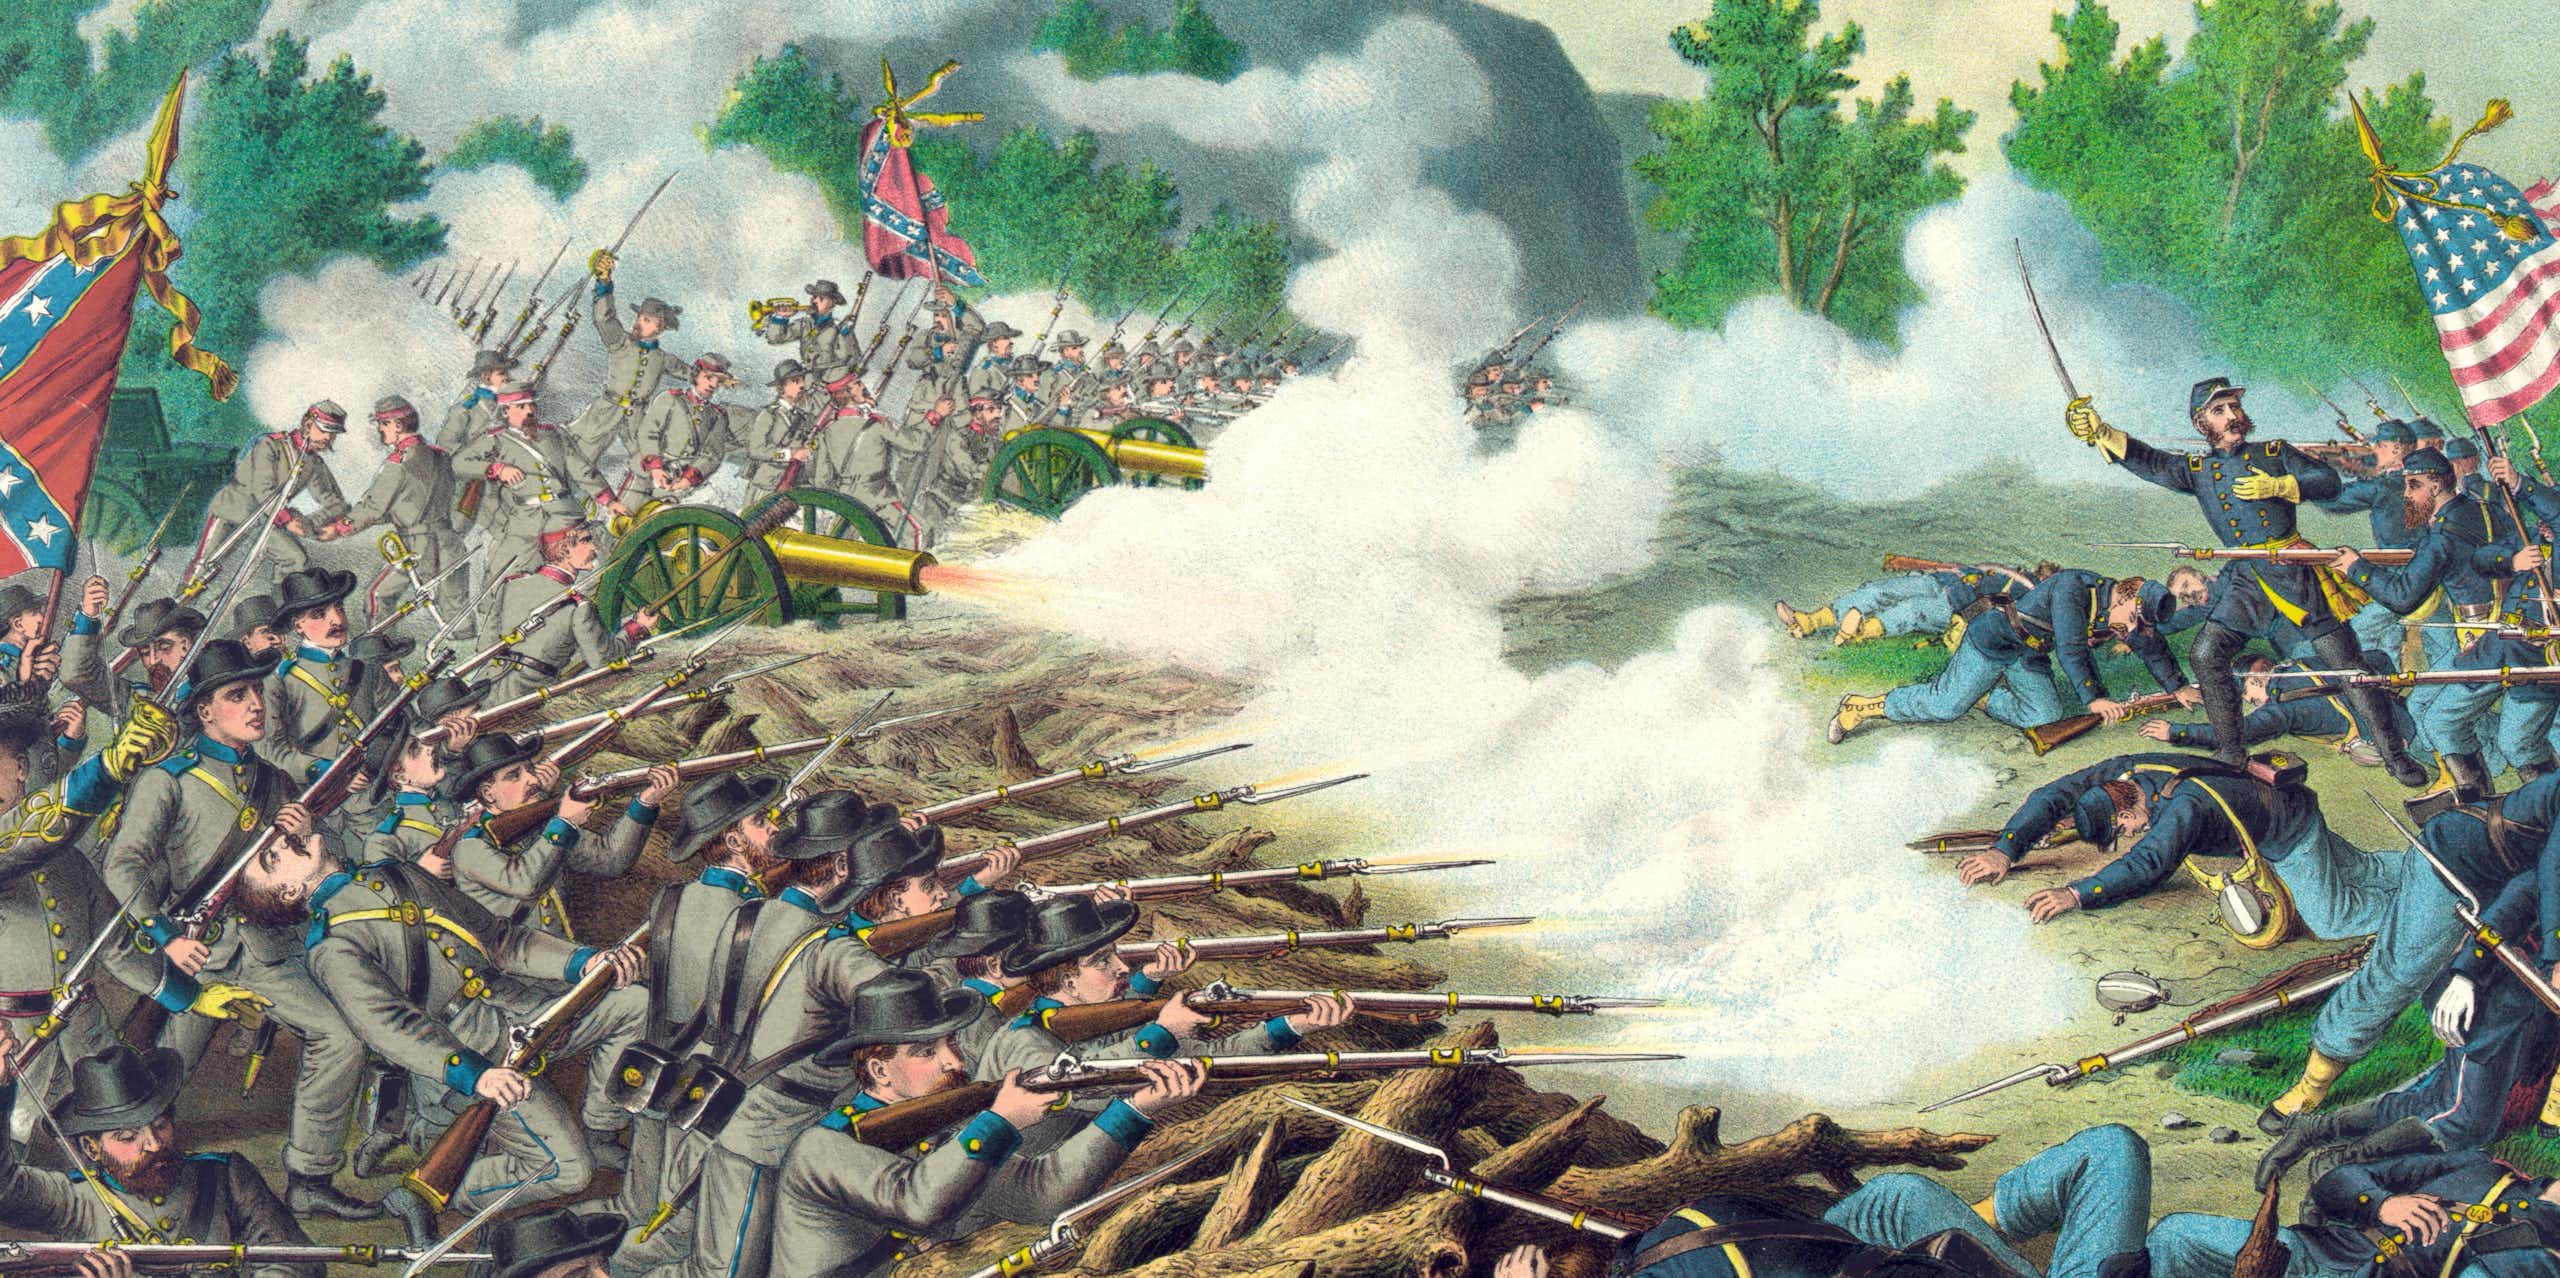 An illustration depicting a Civil War battle, with soldiers firing arms in the foreground and trees and greenery in the background.